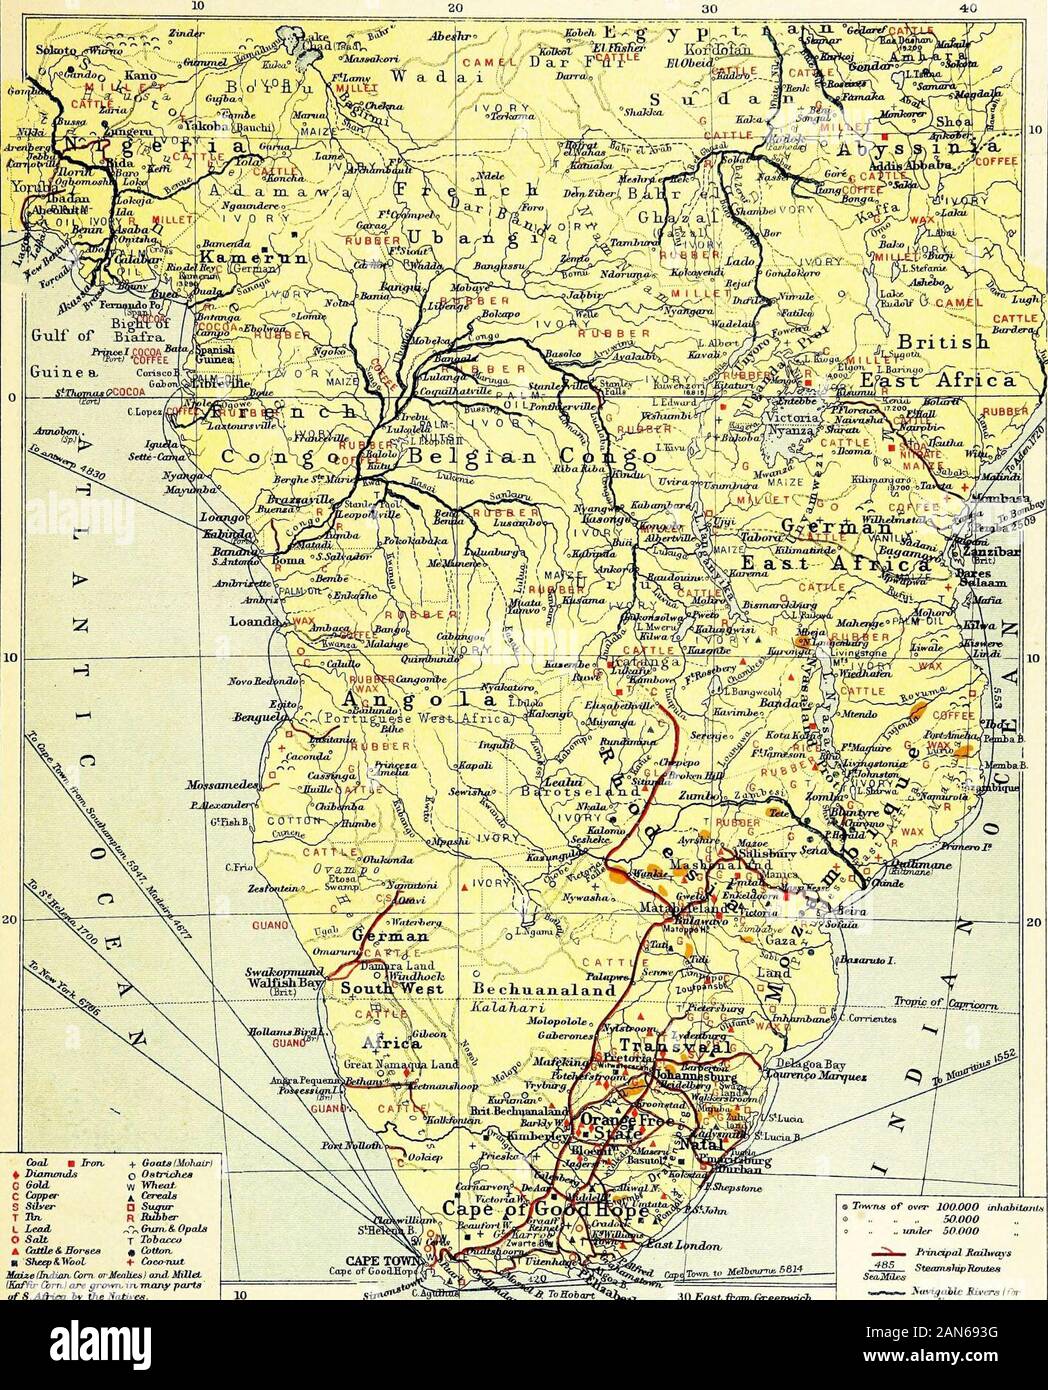 An Atlas Of Commercial Geography I Rgeriijif St N Lf Tli Lijrui Fii Ffrjphical Irwiuuie Central Aot South Africa Commercial 35 Gaol Iron Goata Imuhairl Diamintd S Q Oatru Es G Gold